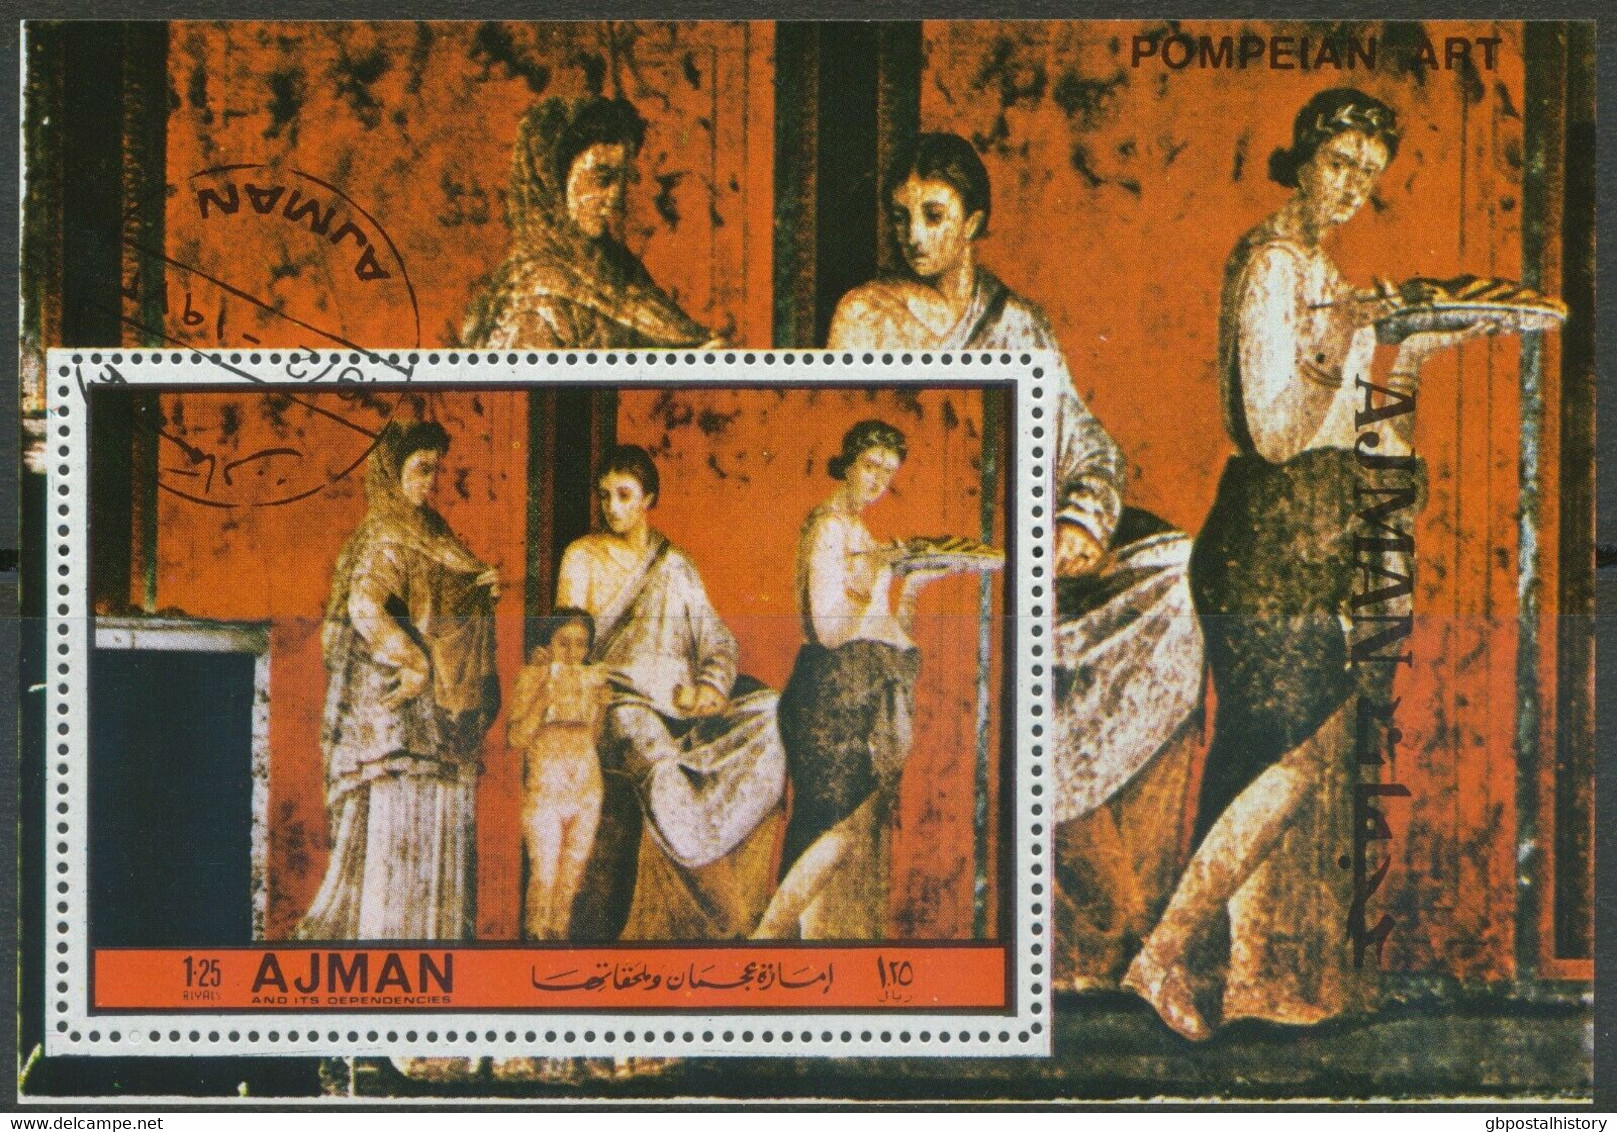 AJMAN 1972, Paintings Pompeian Art 1.25 R. Superb Used MS, MAJOR VARIETY: THICK CARDBOARD-LIKE PAPER - Adschman